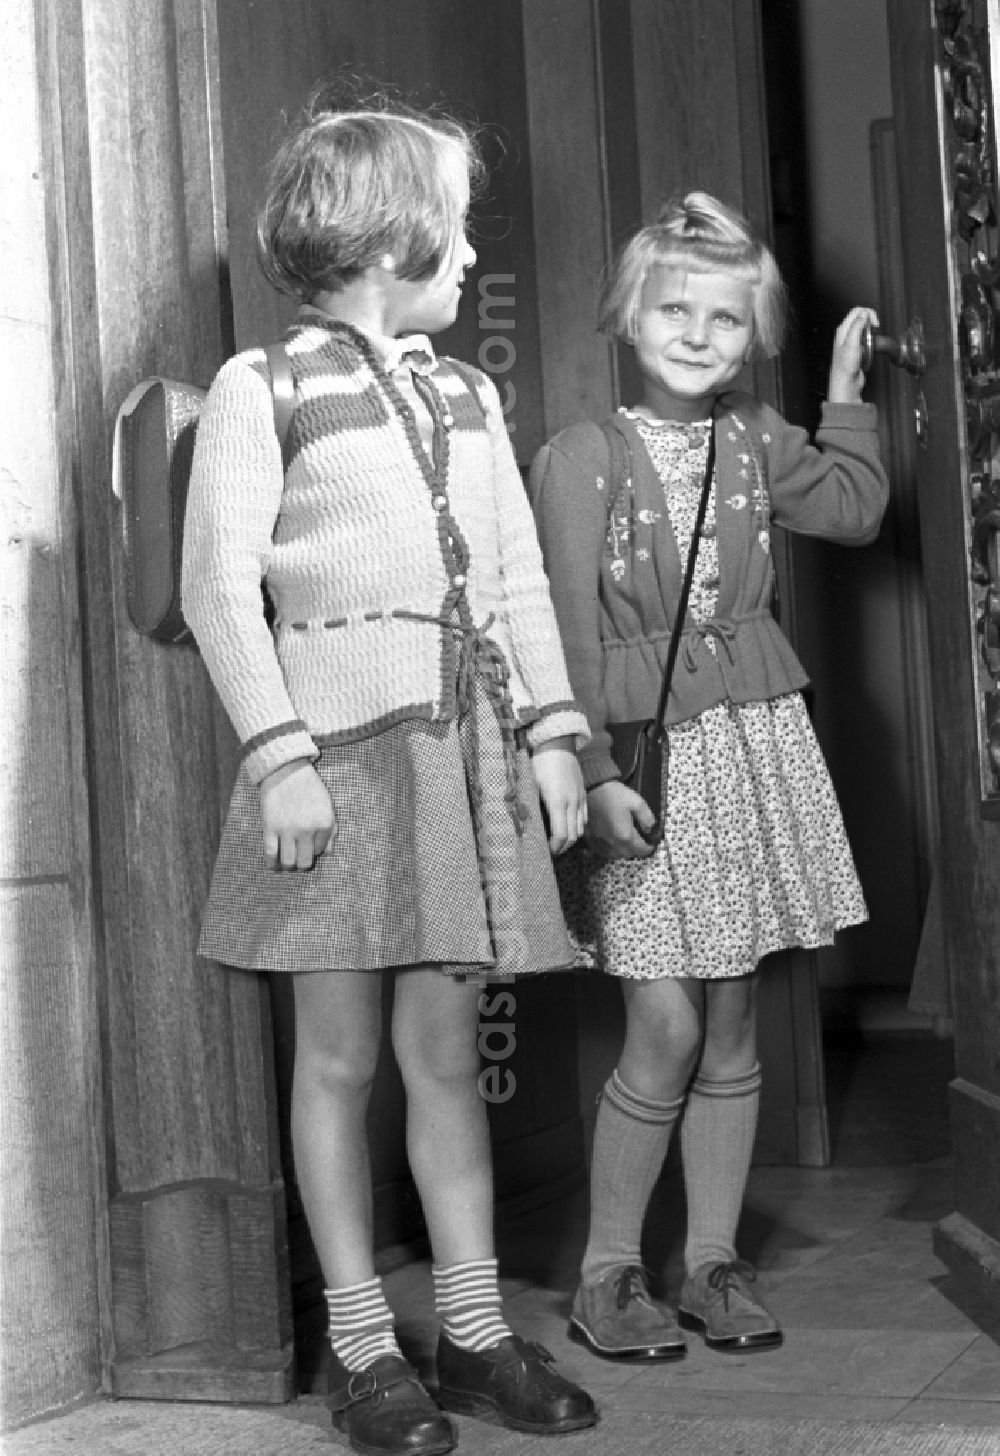 GDR photo archive: Dresden - Children on the occasion of the start of school fuer zwei junge Maedchen mit Schulranzen in the district Altstadt in Dresden in the state Saxony on the territory of the former GDR, German Democratic Republic